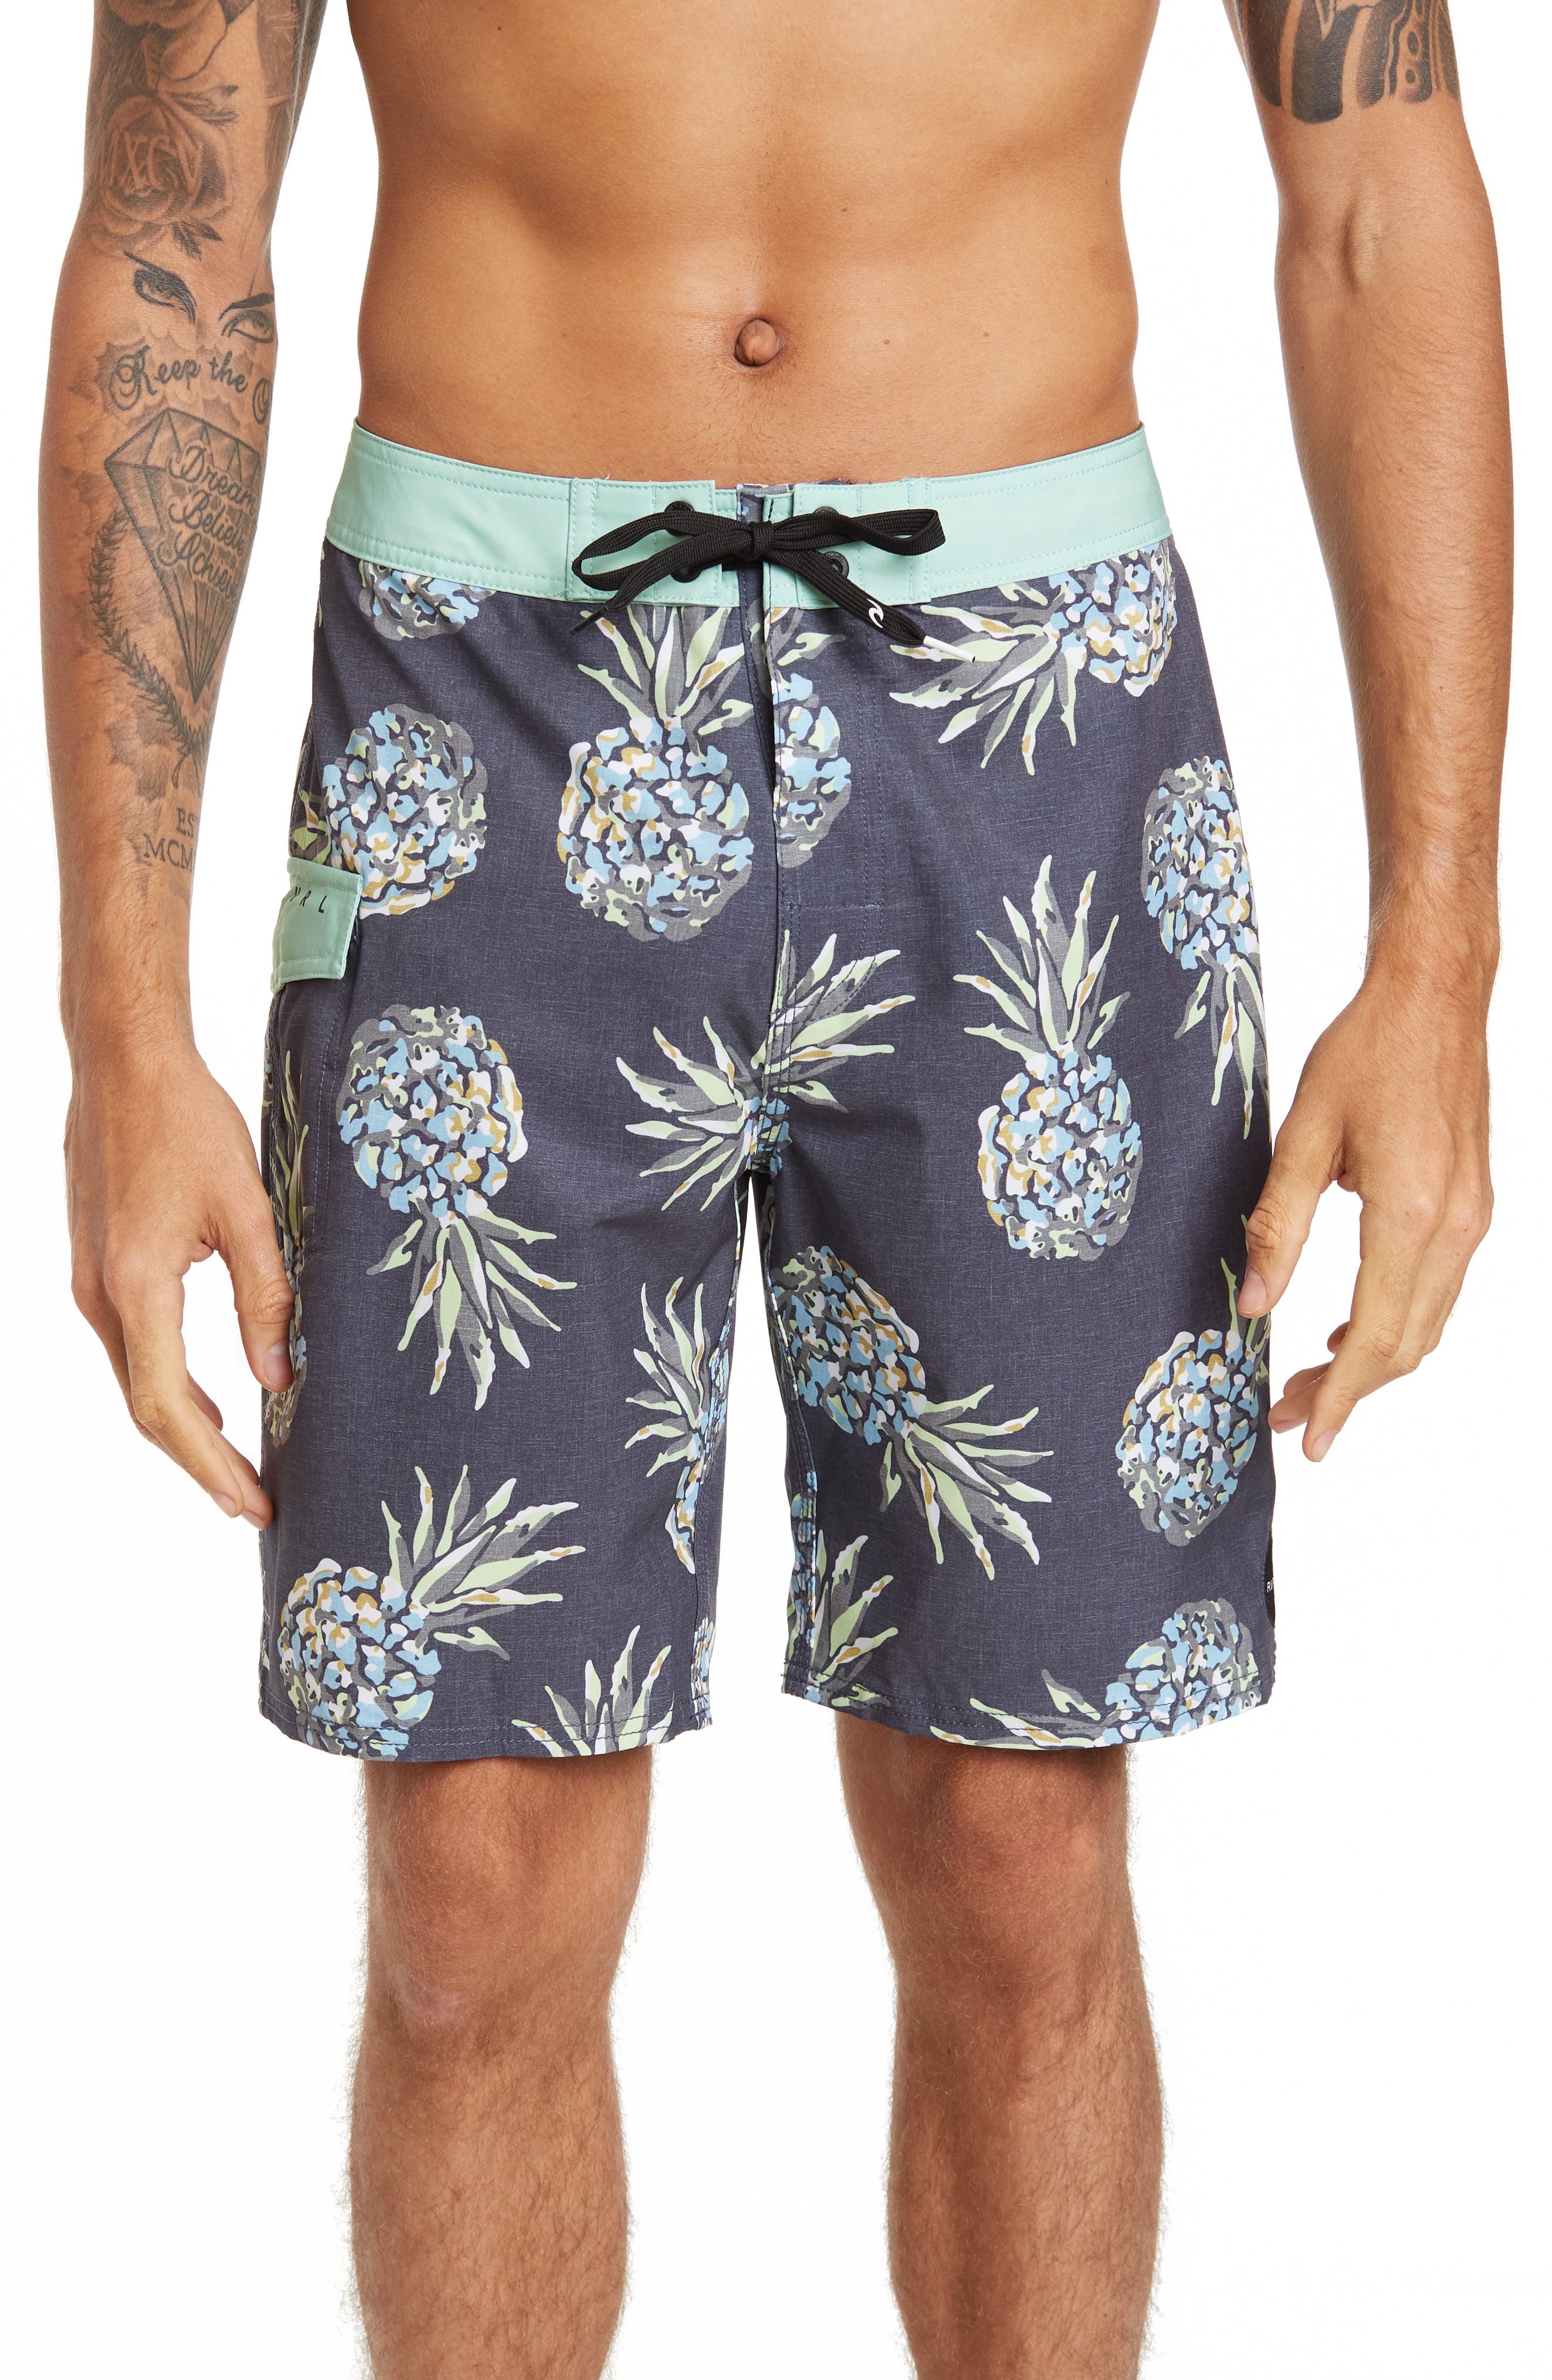 Cute Red Chili Peppers Mens Swim Trunks Quick Dry Board Shorts with Pockets Summer Swimsuit Beach Short